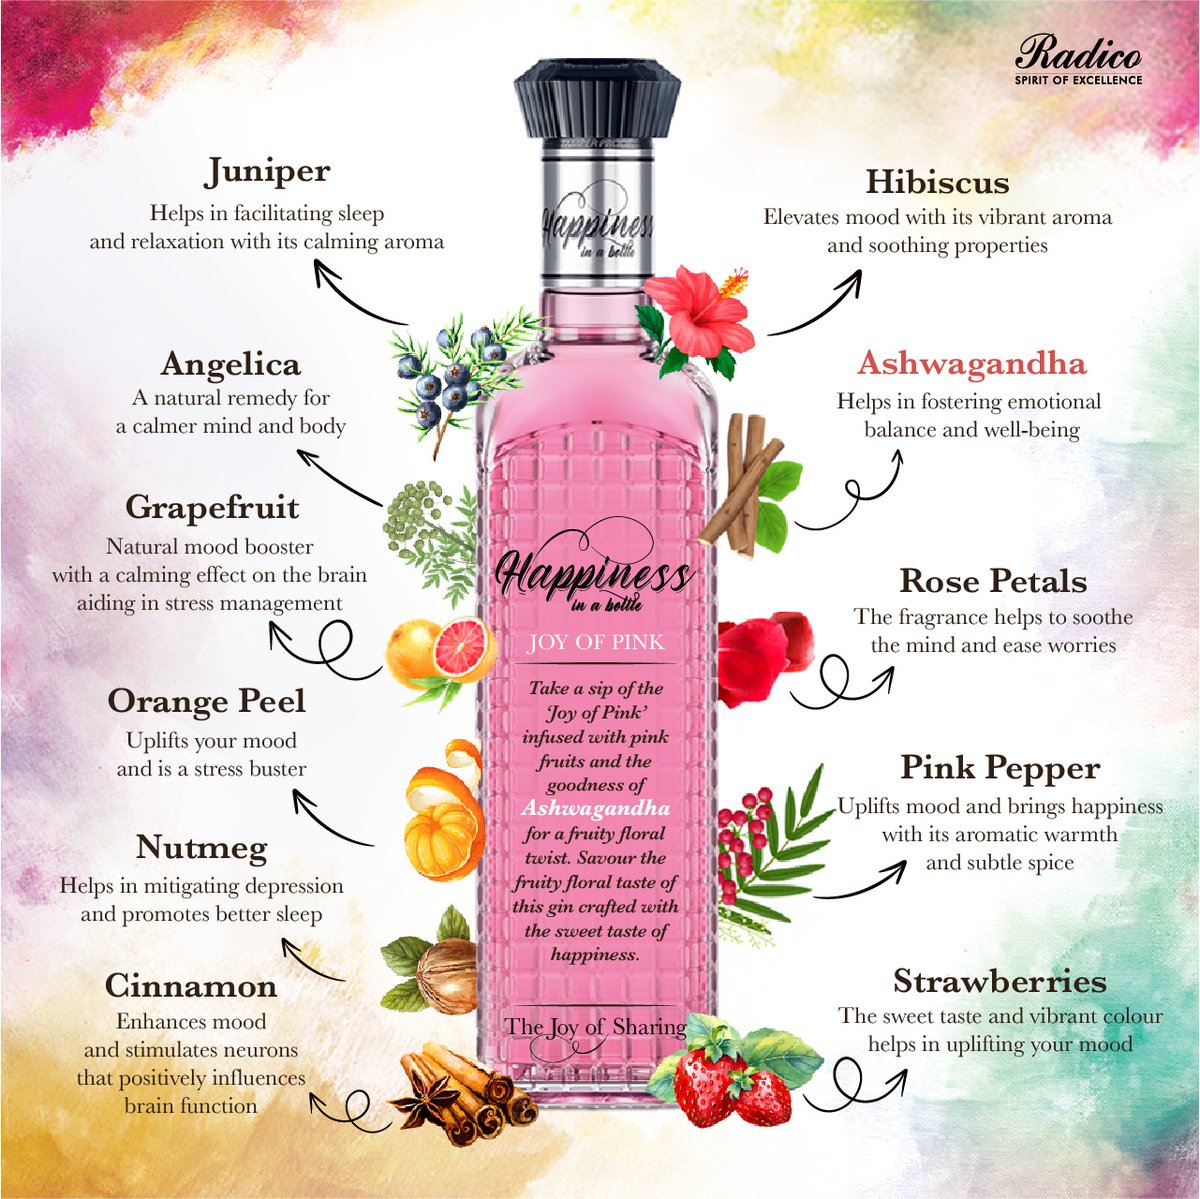 Indulge in an exquisite fusion of fruity floral taste with Happiness in a Bottle - Joy of Pink, enriched with the goodness of ashwagandha. #HappinessInABottle #HappilyCraftedGin #BlissfulBotanicals #MoodEnhancingIngredients #JoyOfPink #JoyOfSharing